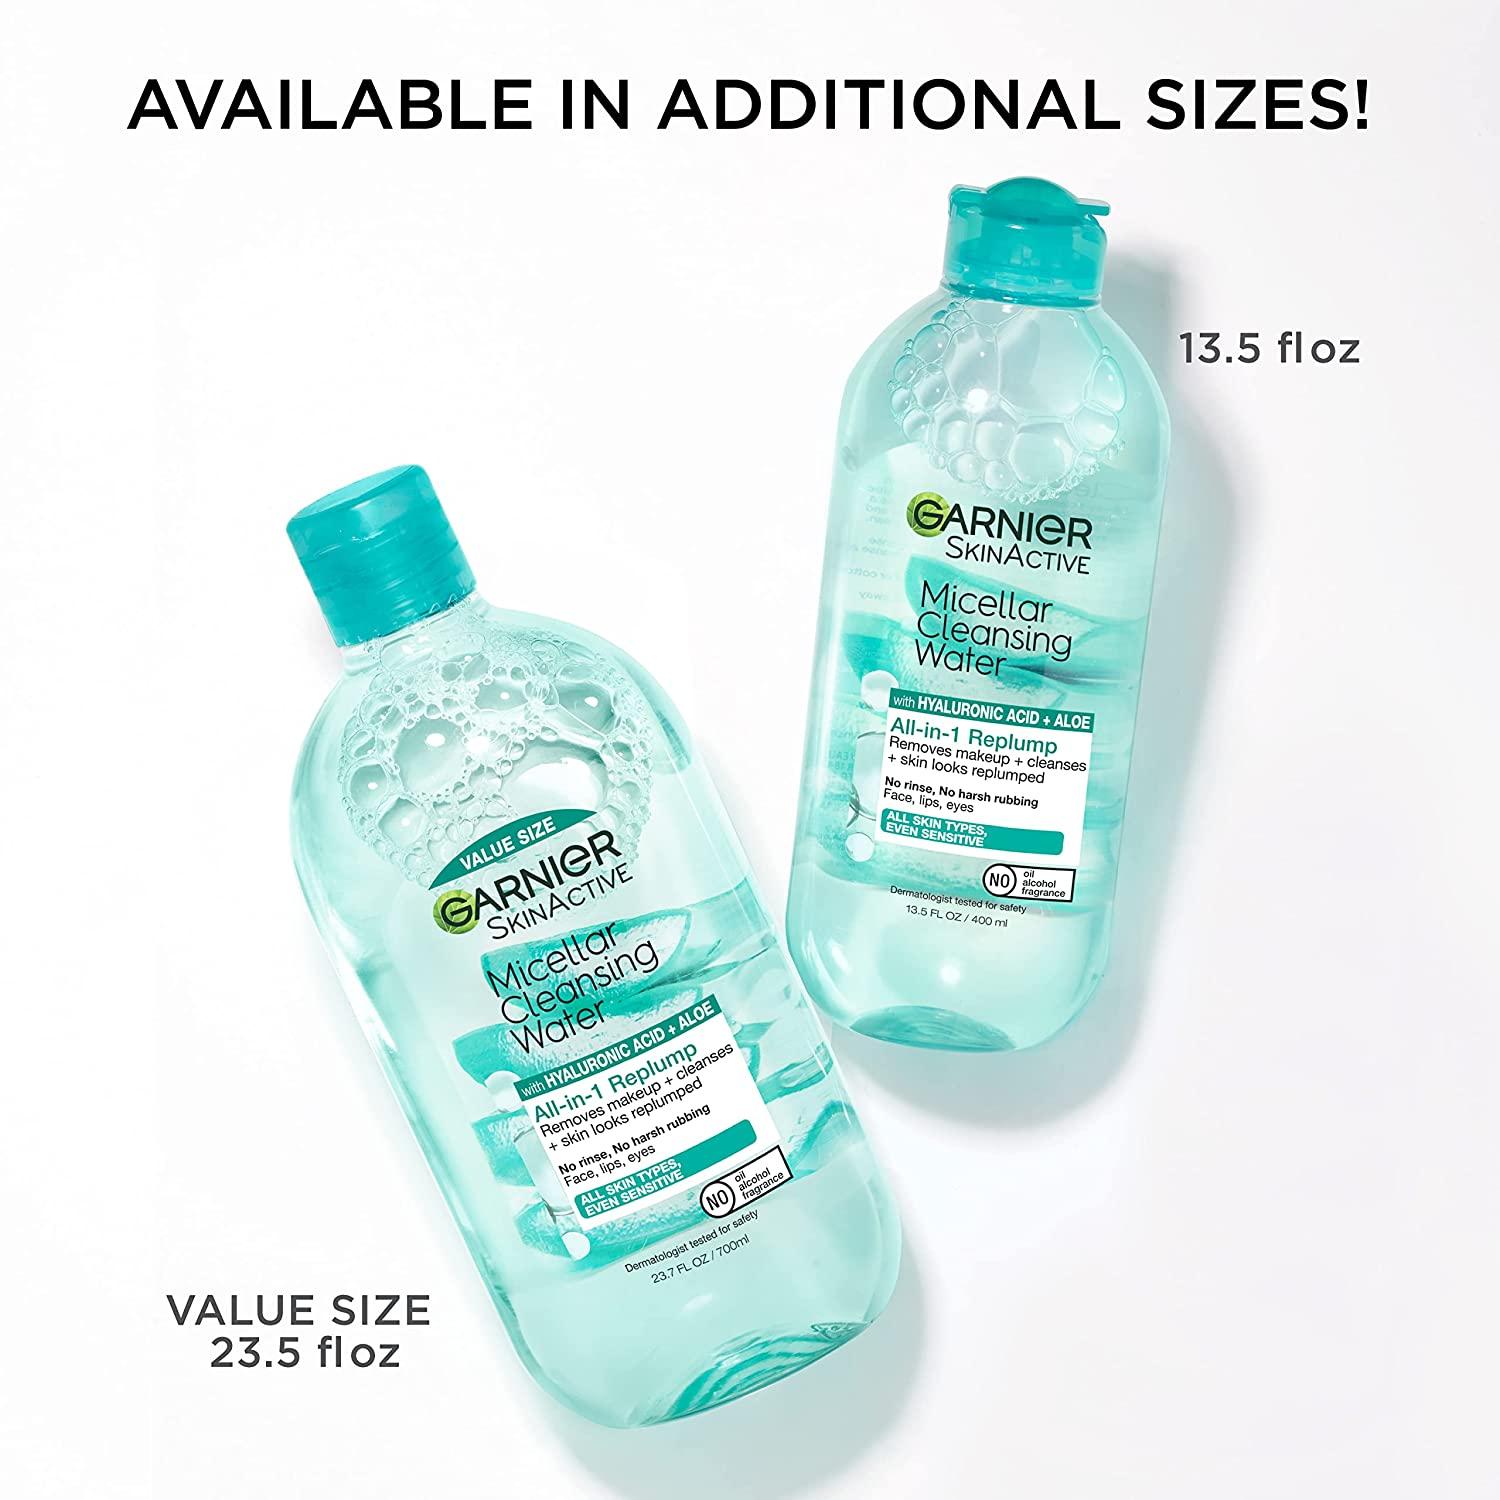 Garnier SkinActive Micellar Water for All Skin Types, Facial Cleanser &  Makeup Remover, 13.5 Fl Oz (400mL), 1 Count (Packaging May Vary)